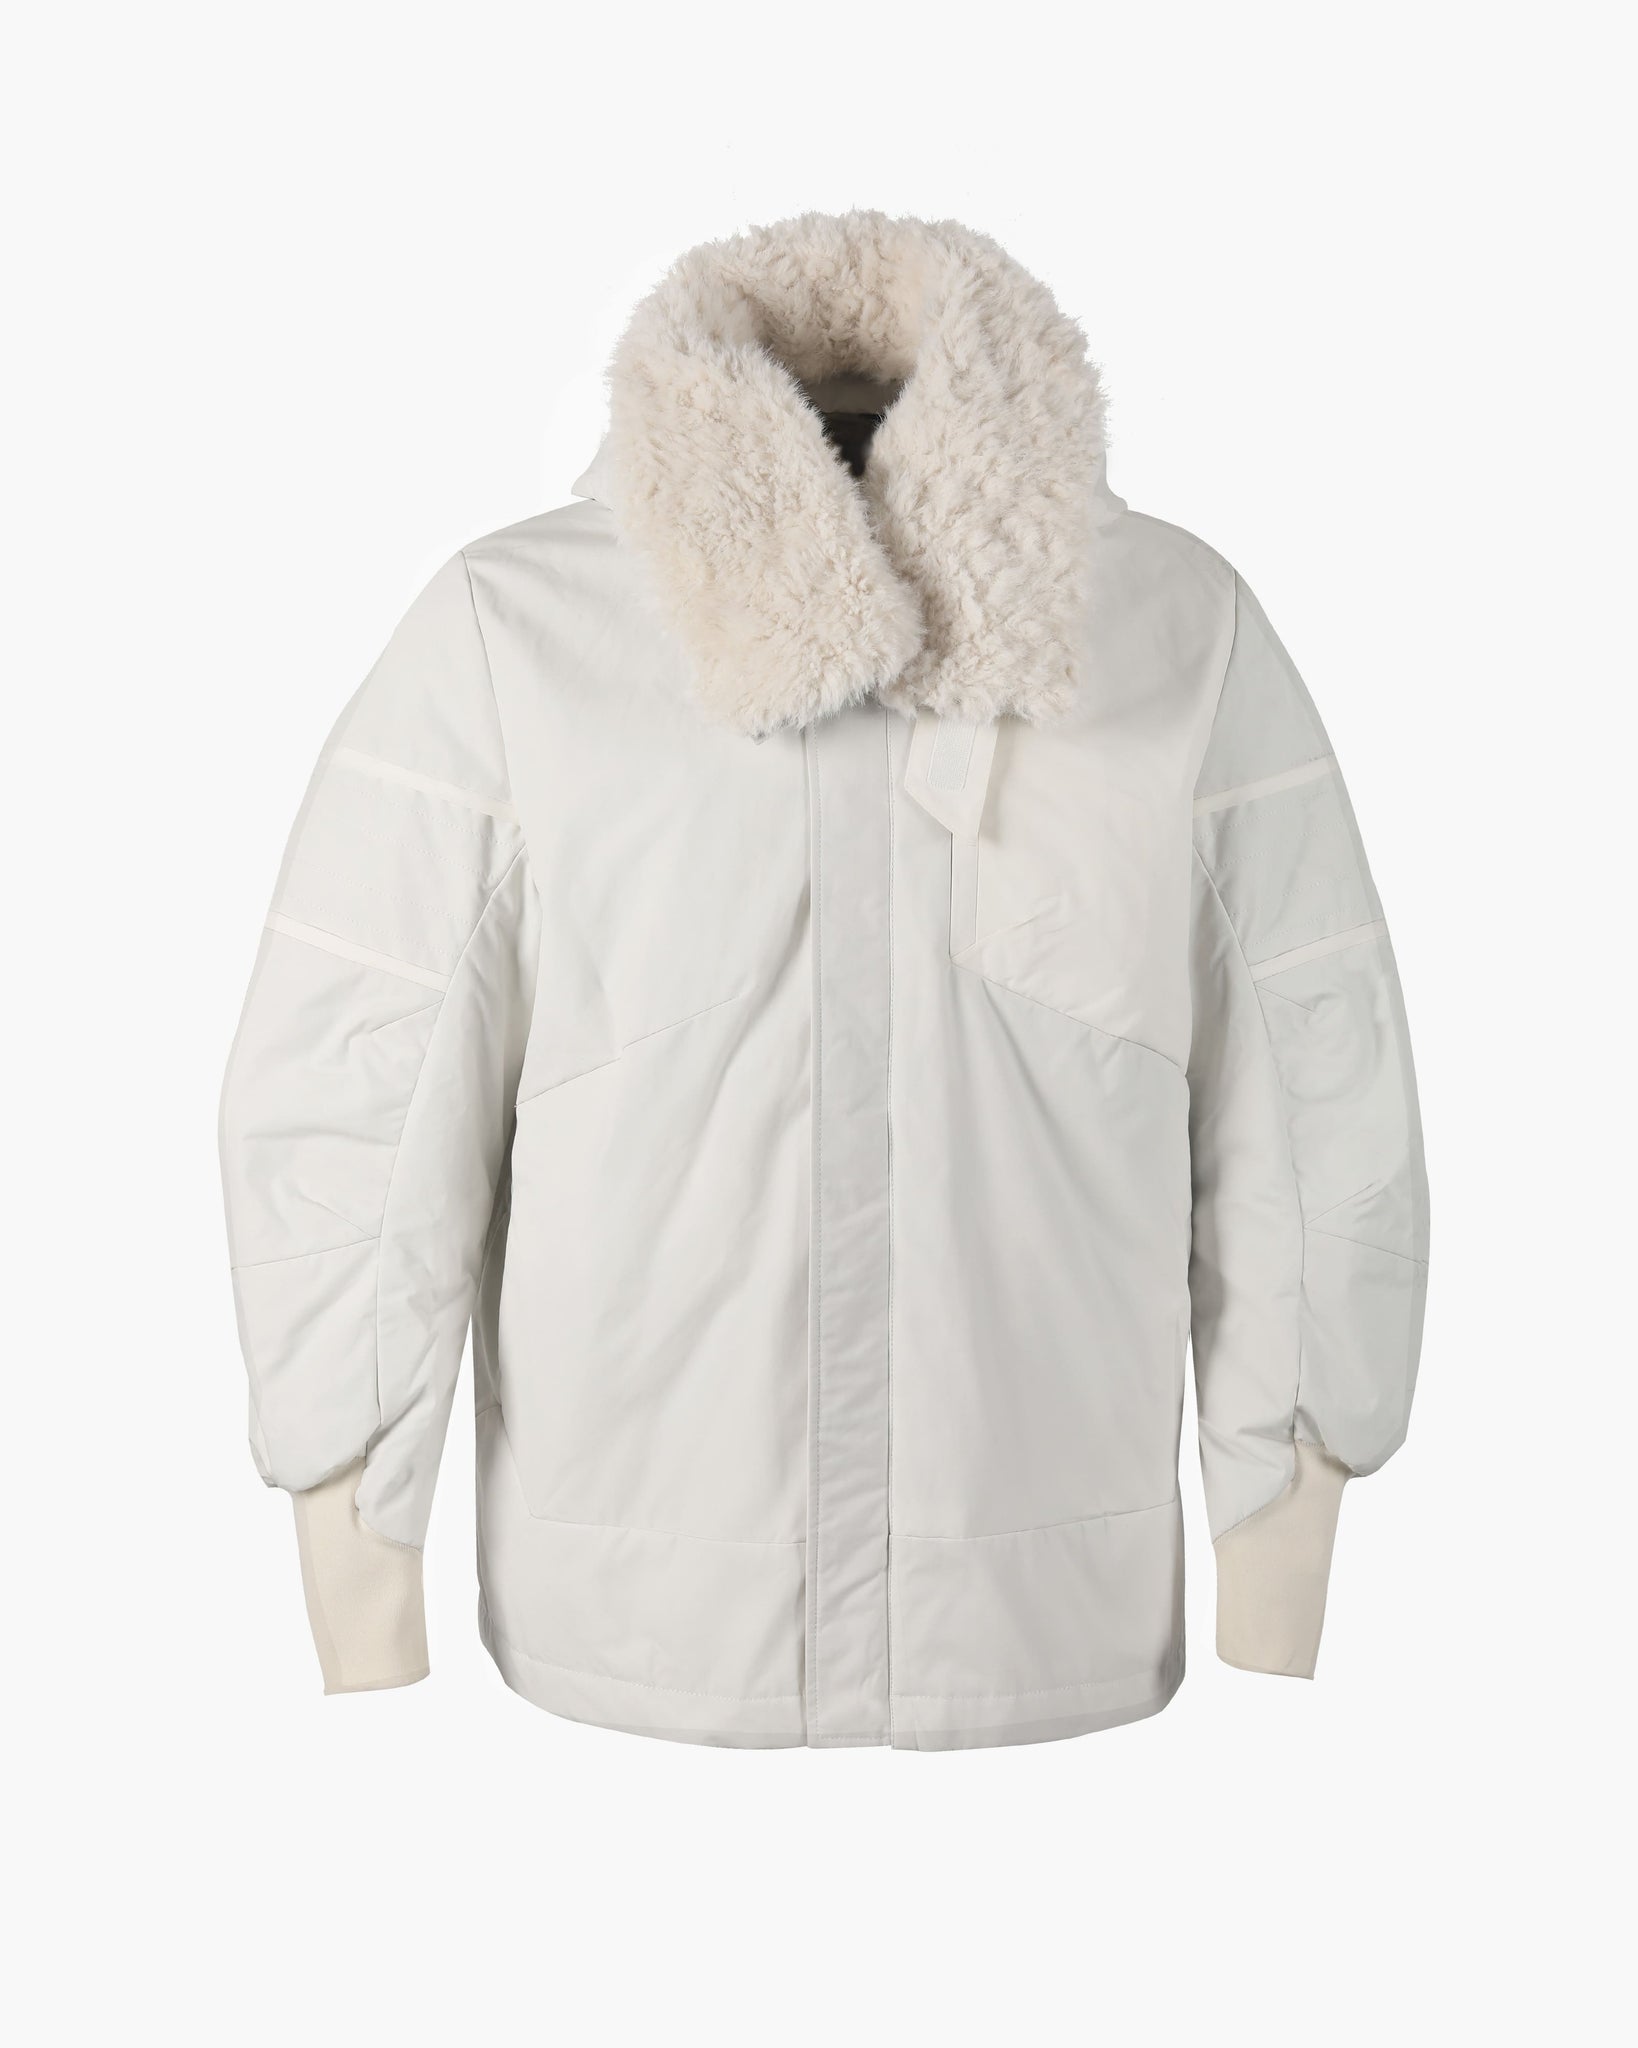 ROSEN-X Altair Padded Jacket in Ventile Cotton